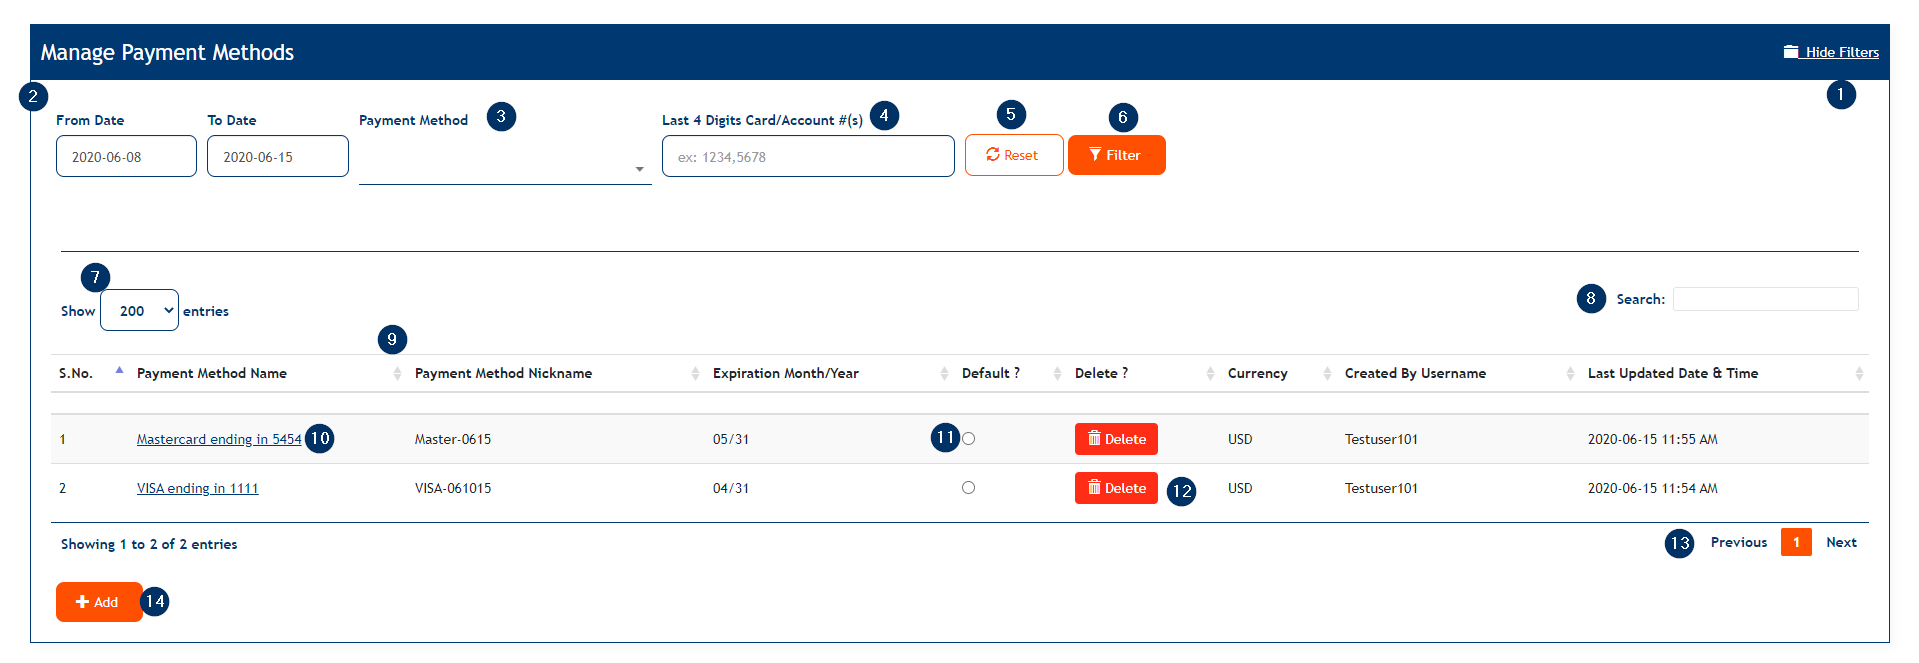 Manage Payment Methods screen